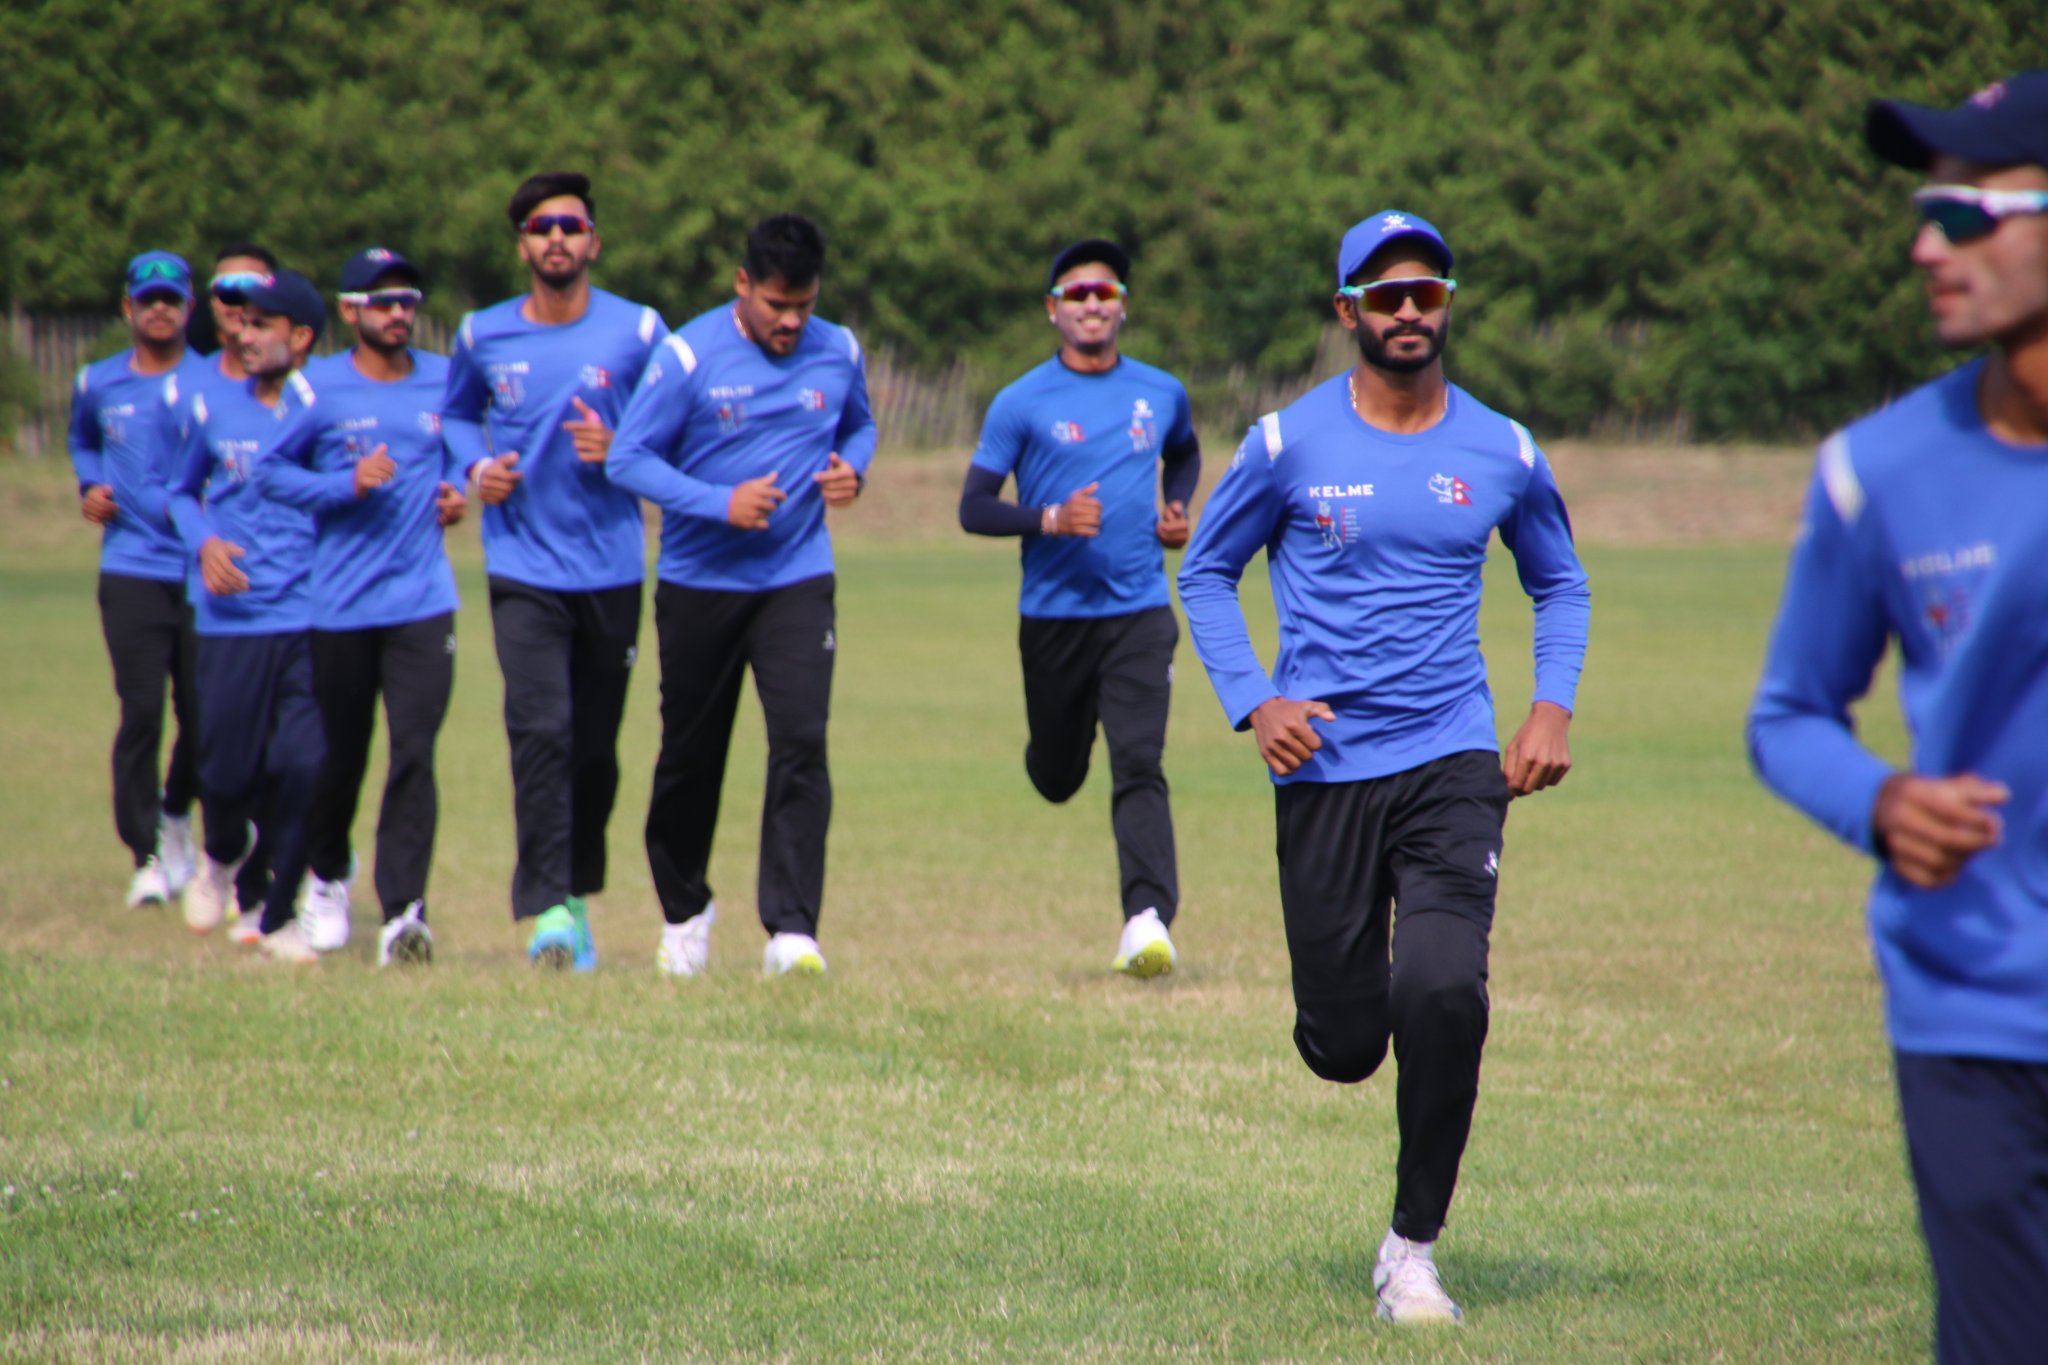 Nepal to play against Ontario on Sunday evening